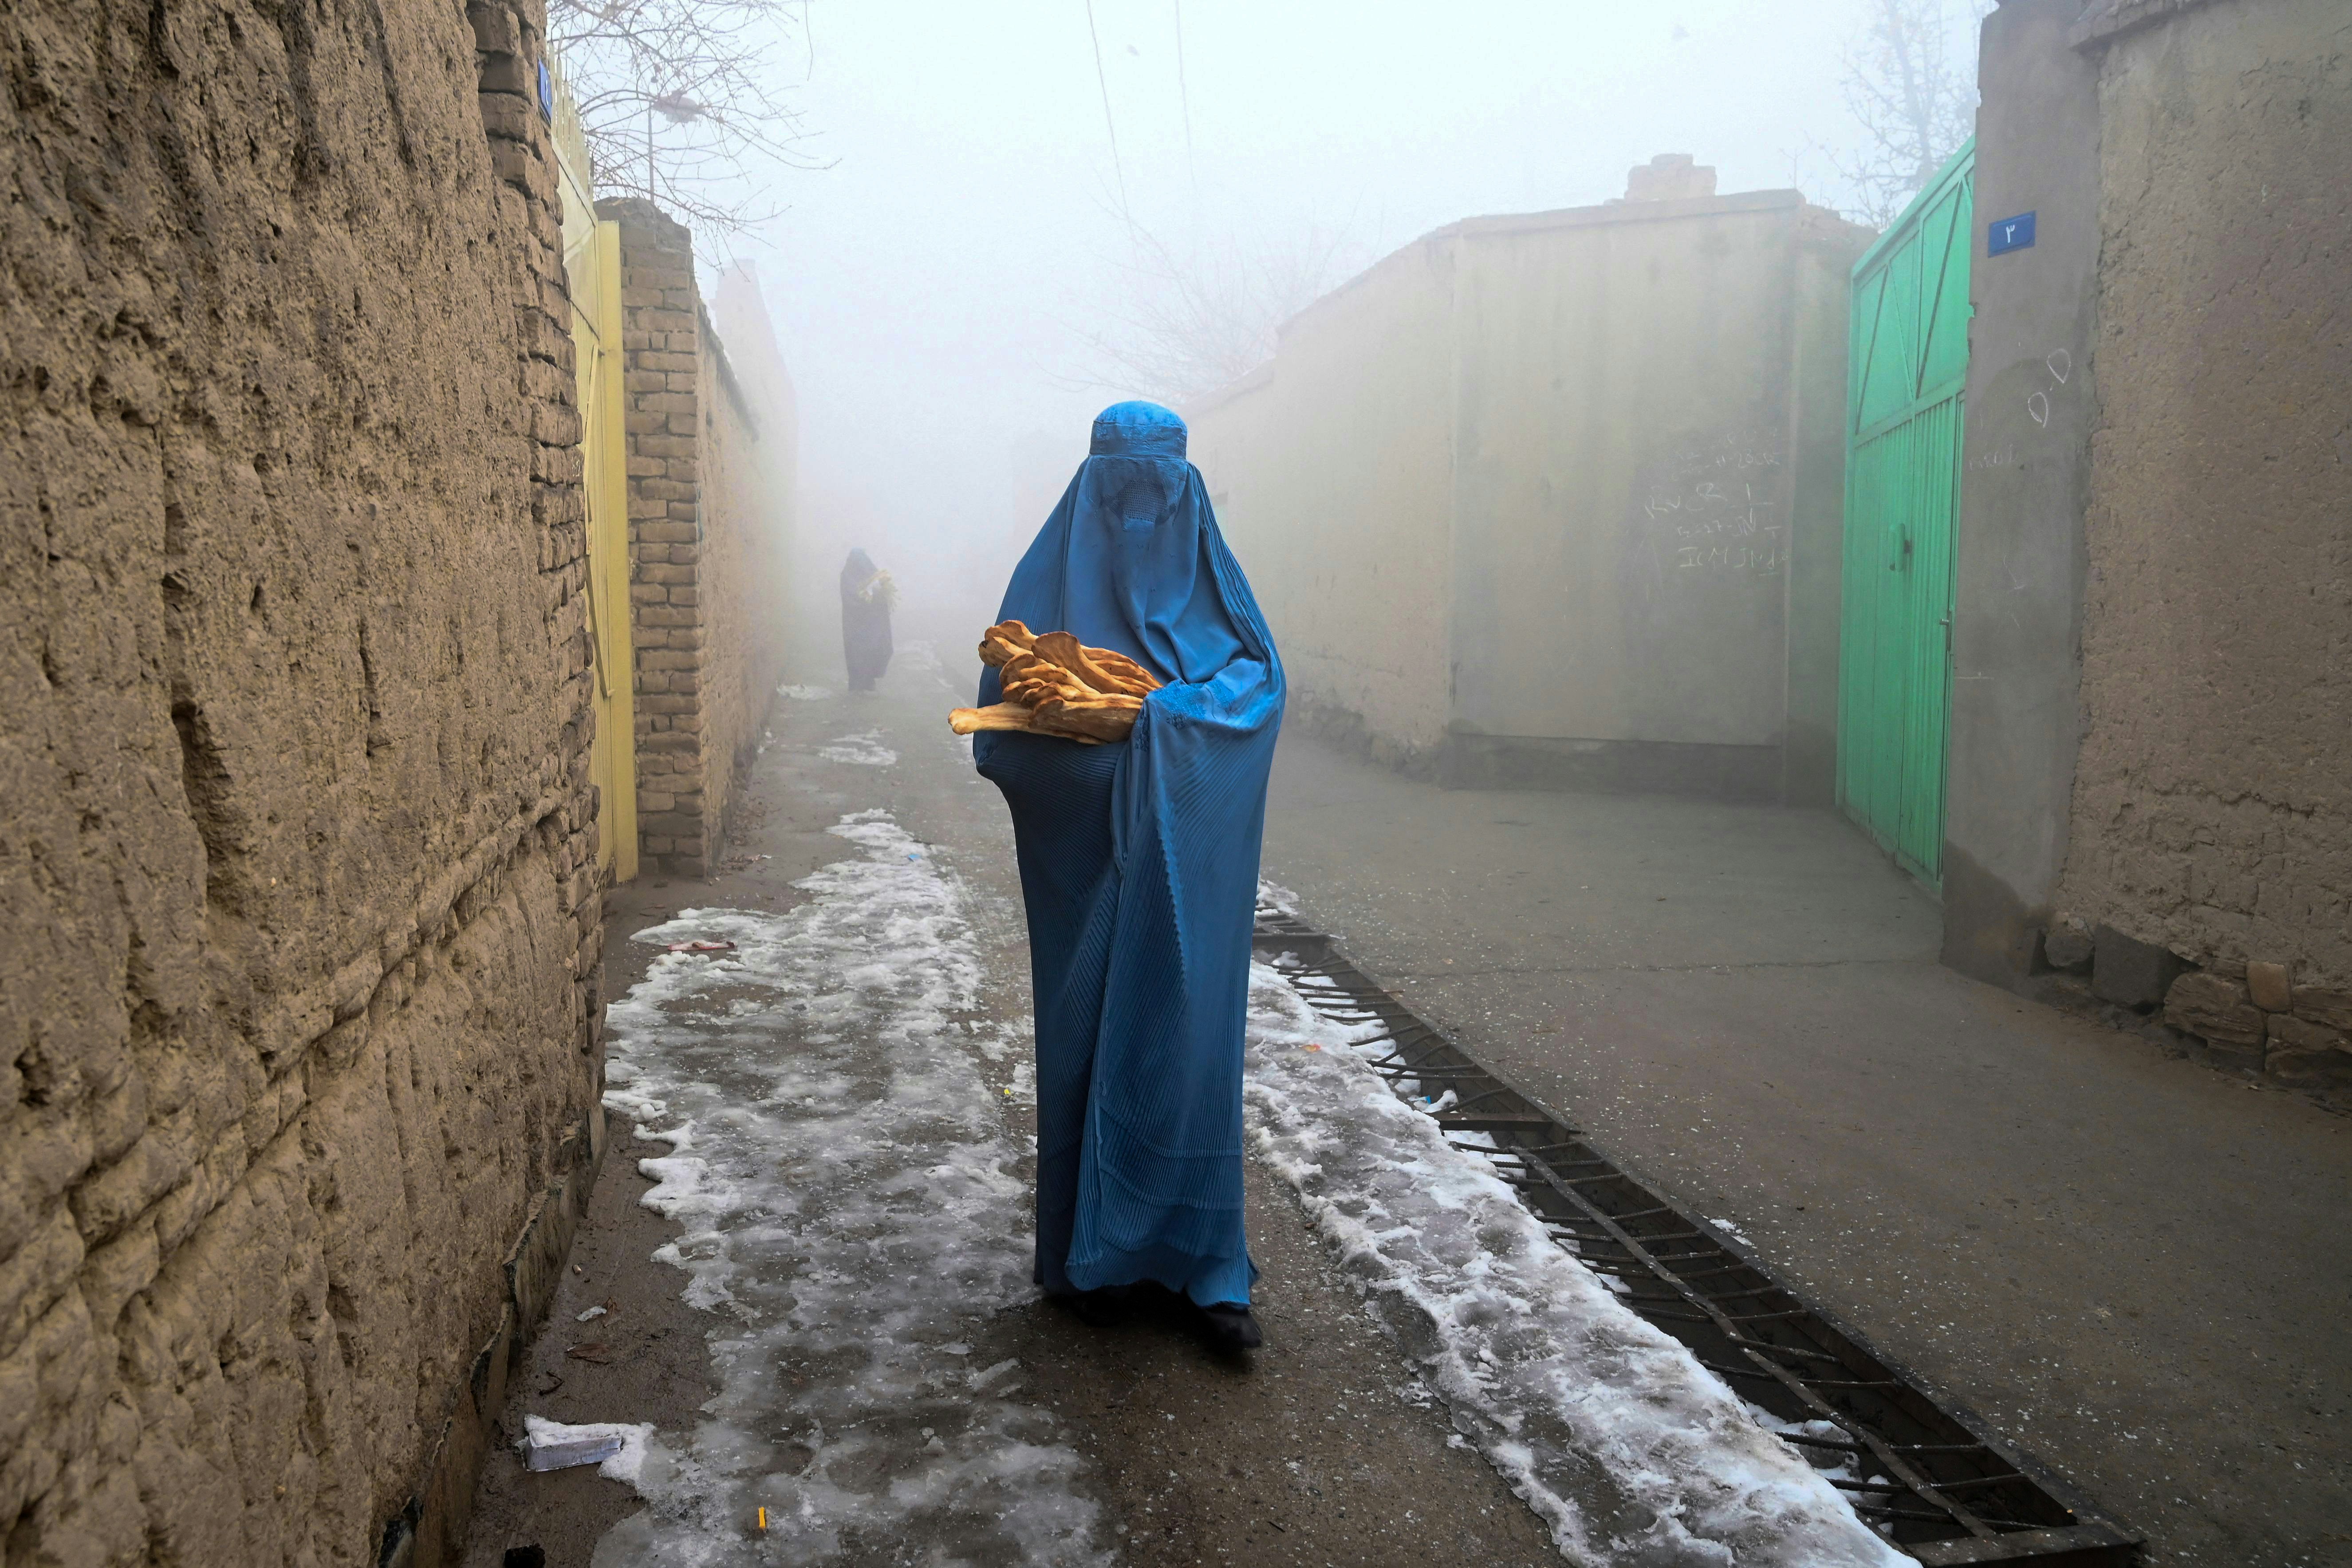 TOPSHOT - A woman wearing a burqa walks along a road towards her home after receiving free bread distributed as part of the Save Afghans From Hunger campaign in Kabul on January 18, 2022. (Photo by Wakil KOHSAR / AFP) (Photo by WAKIL KOHSAR/AFP via Getty Images)